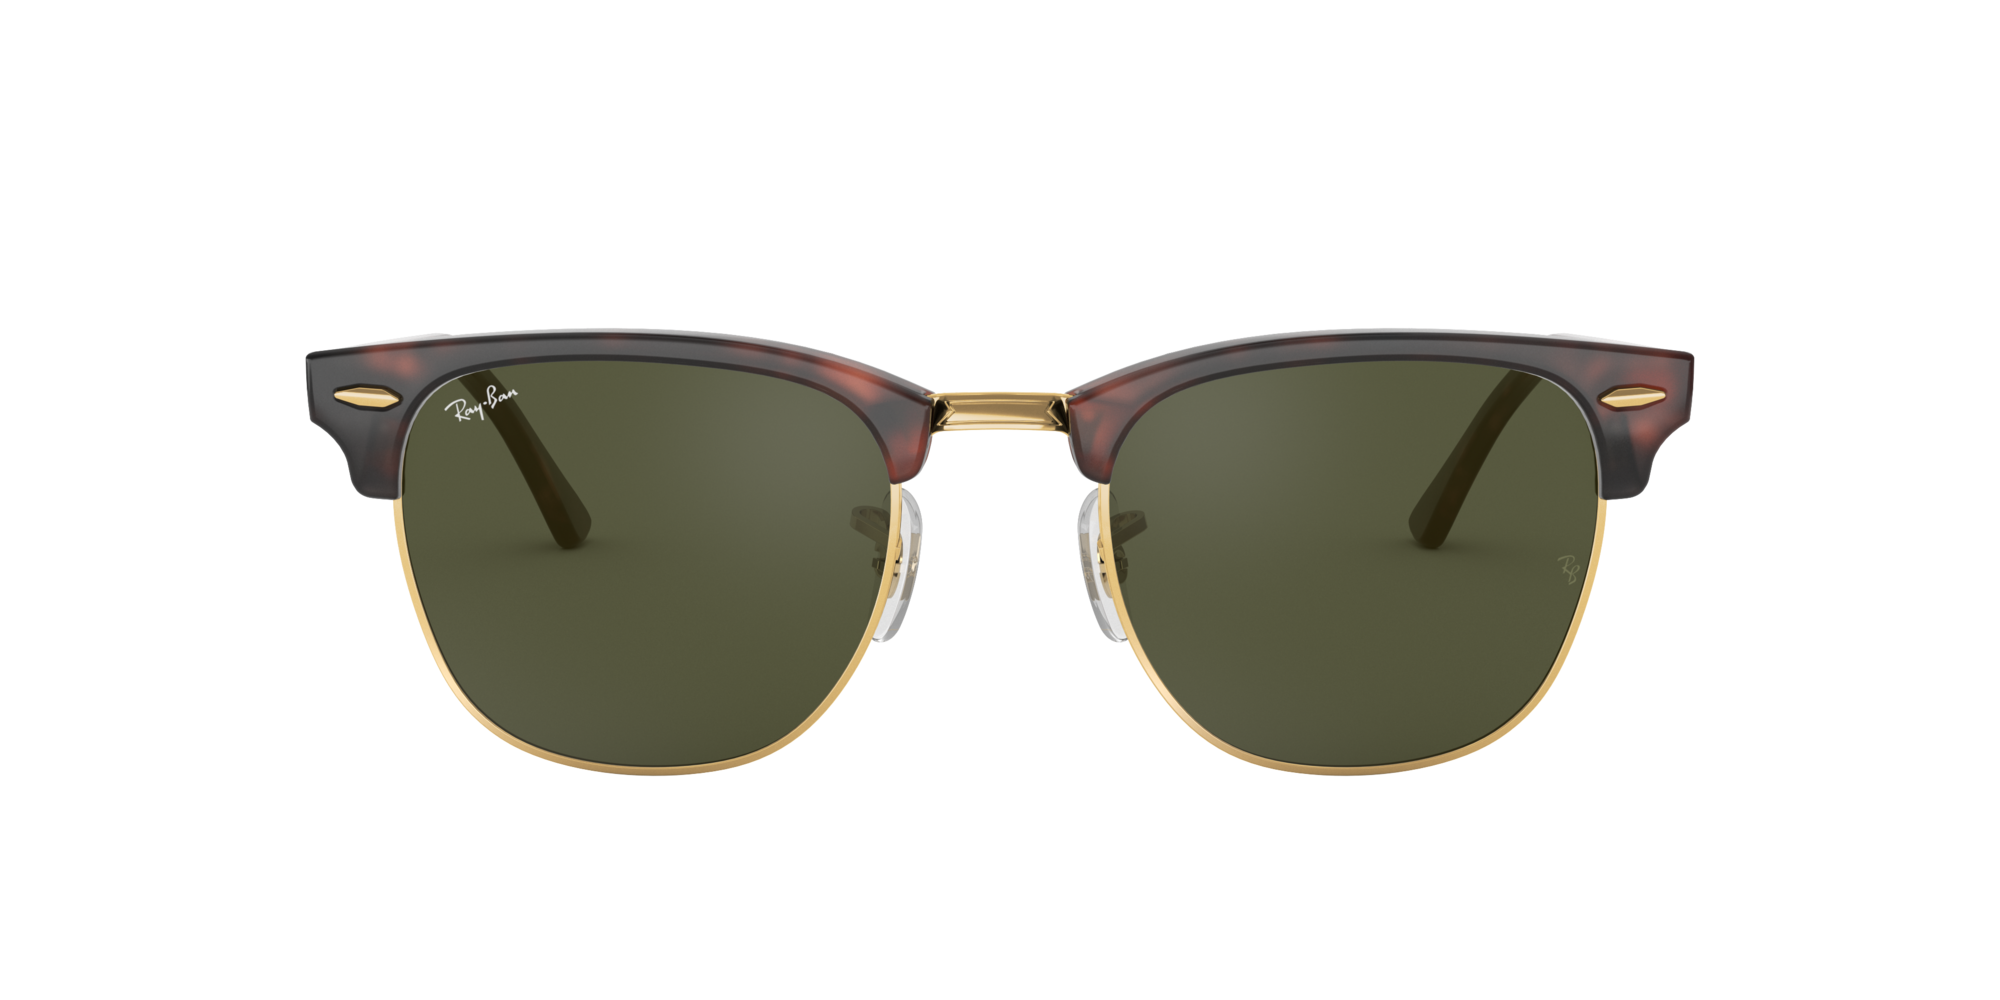 ray ban clubmaster 51mm tortoise